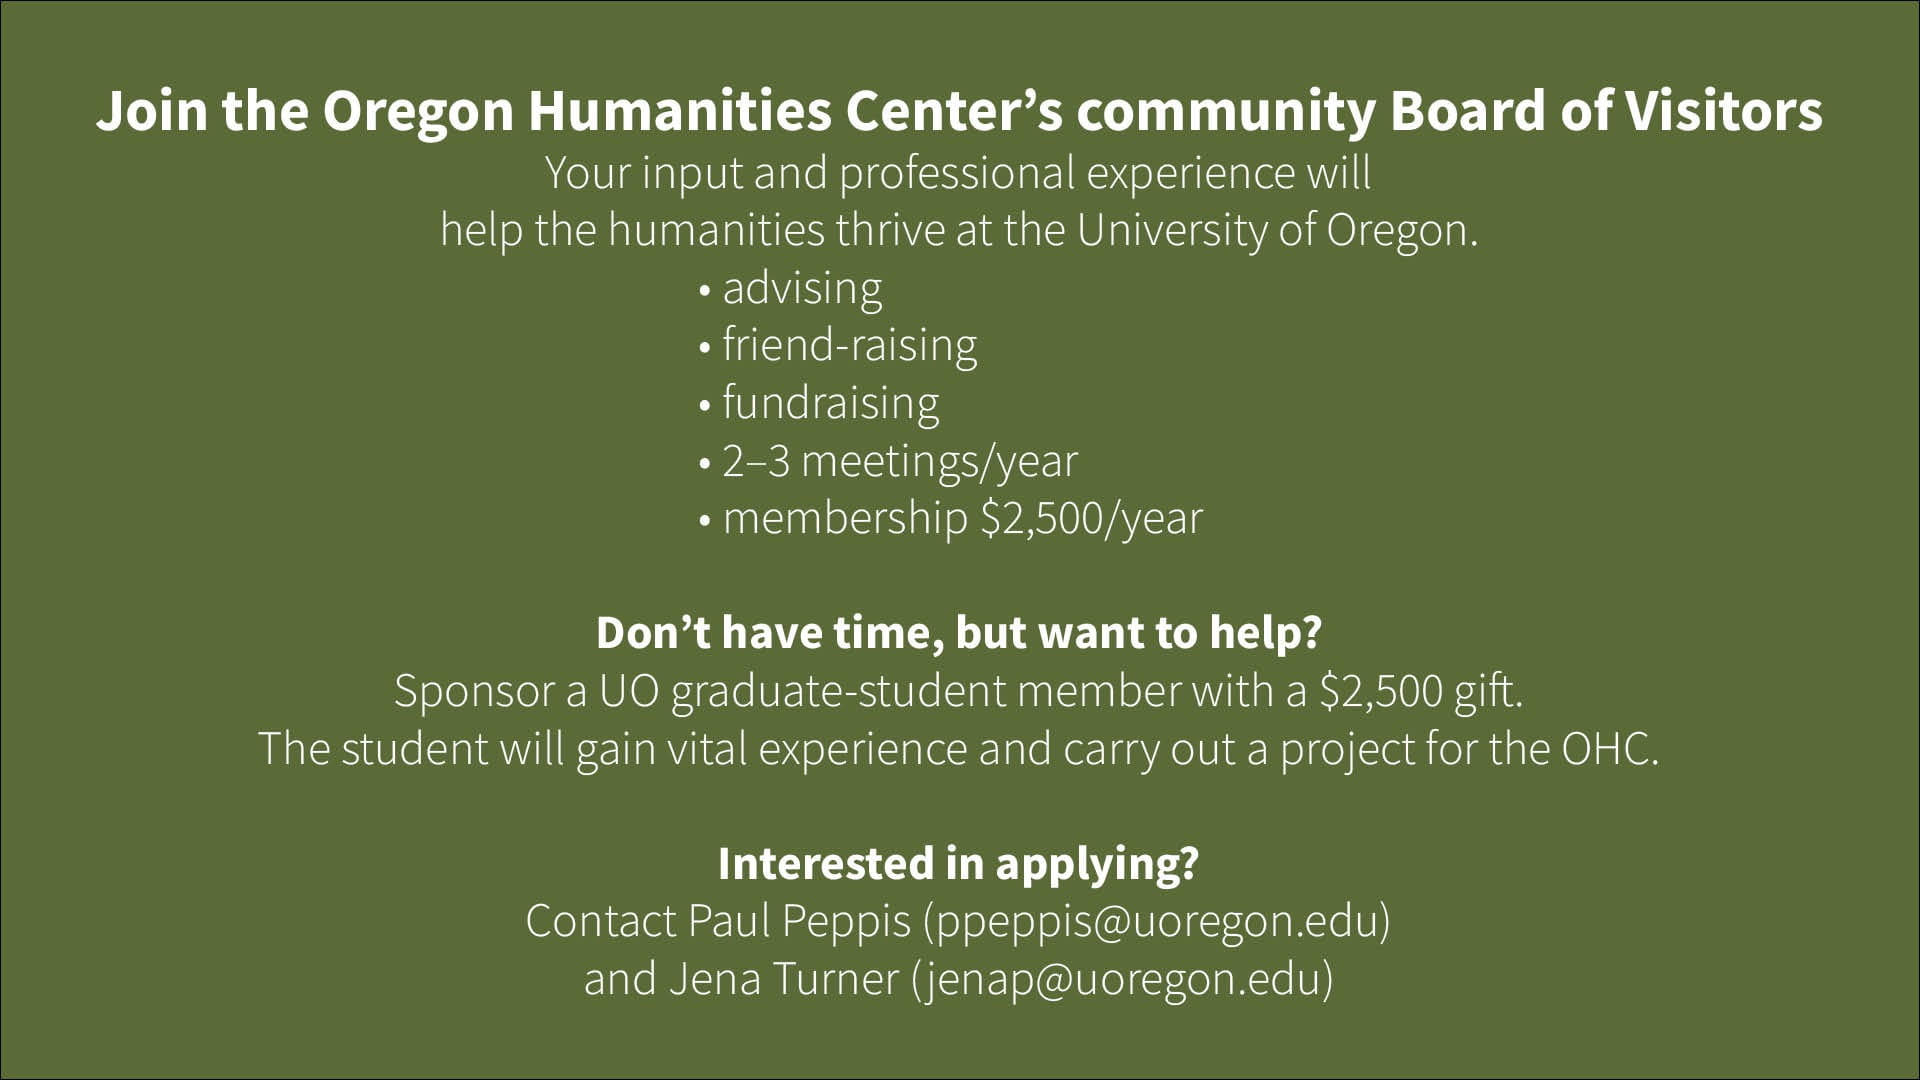 Join the Oregon Humanities Center’s community Board of Visitors Your input and professional experience will help the humanities thrive at the University of Oregon. • advising • friend-raising • fundraising • 2–3 meetings/year • membership $2,500/year Don’t have time, but want to help? Sponsor a UO graduate-student member with a $2,500 gift. The student will gain vital experience and carry out a project for the OHC. Interested in applying? Contact Paul Peppis (ppeppis@uoregon.edu) and Jena Turner (jenap@uoregon.edu)